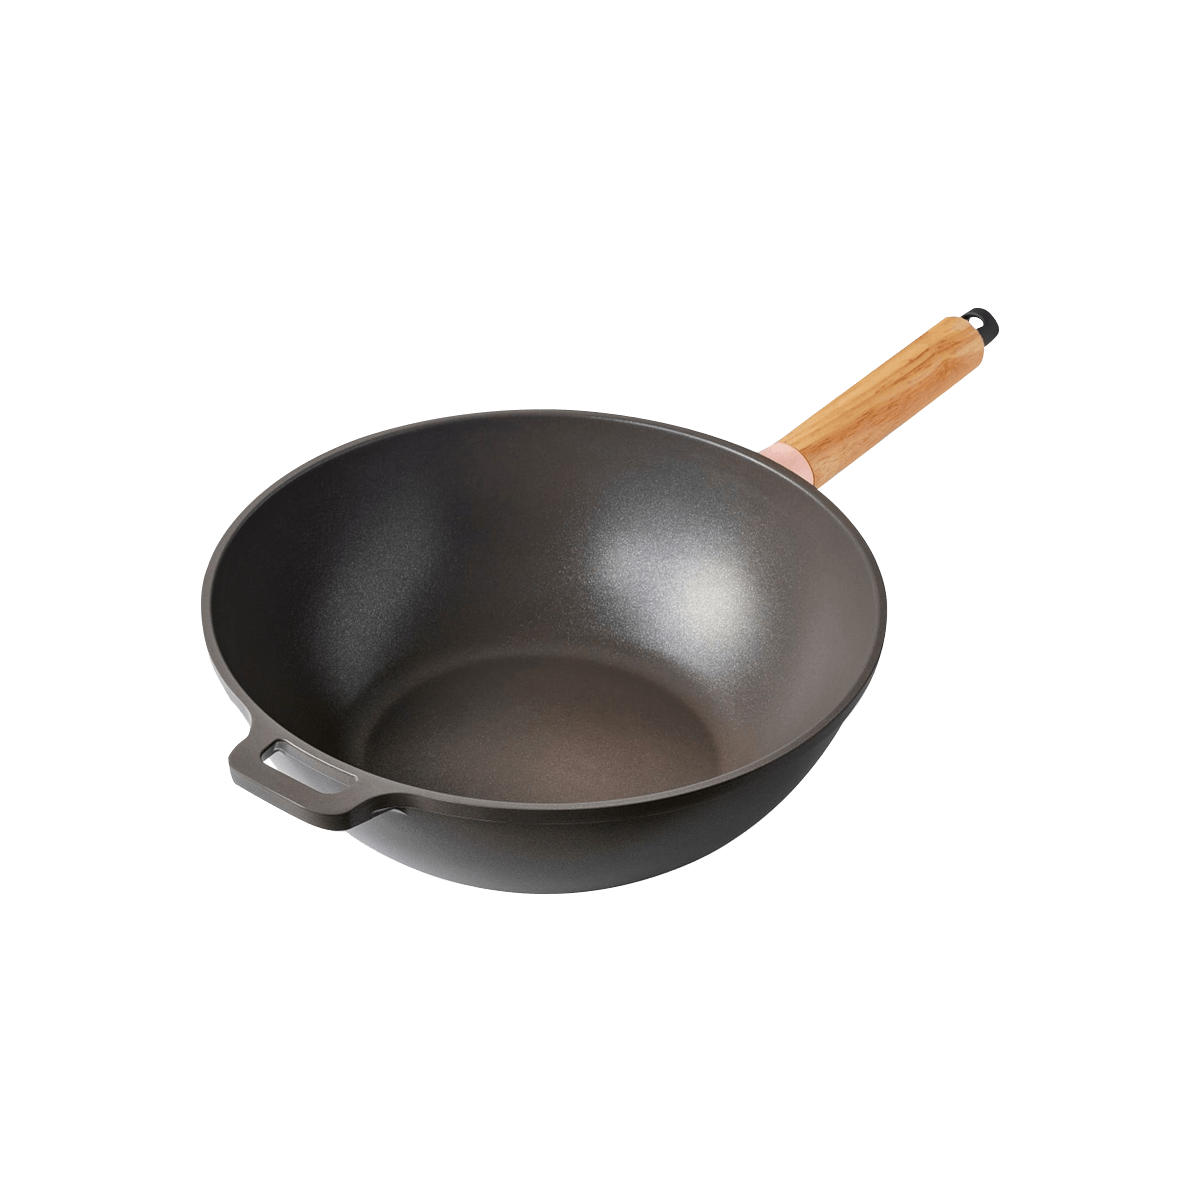 Get Amercook Small Non Stick Wok 16CM Delivered